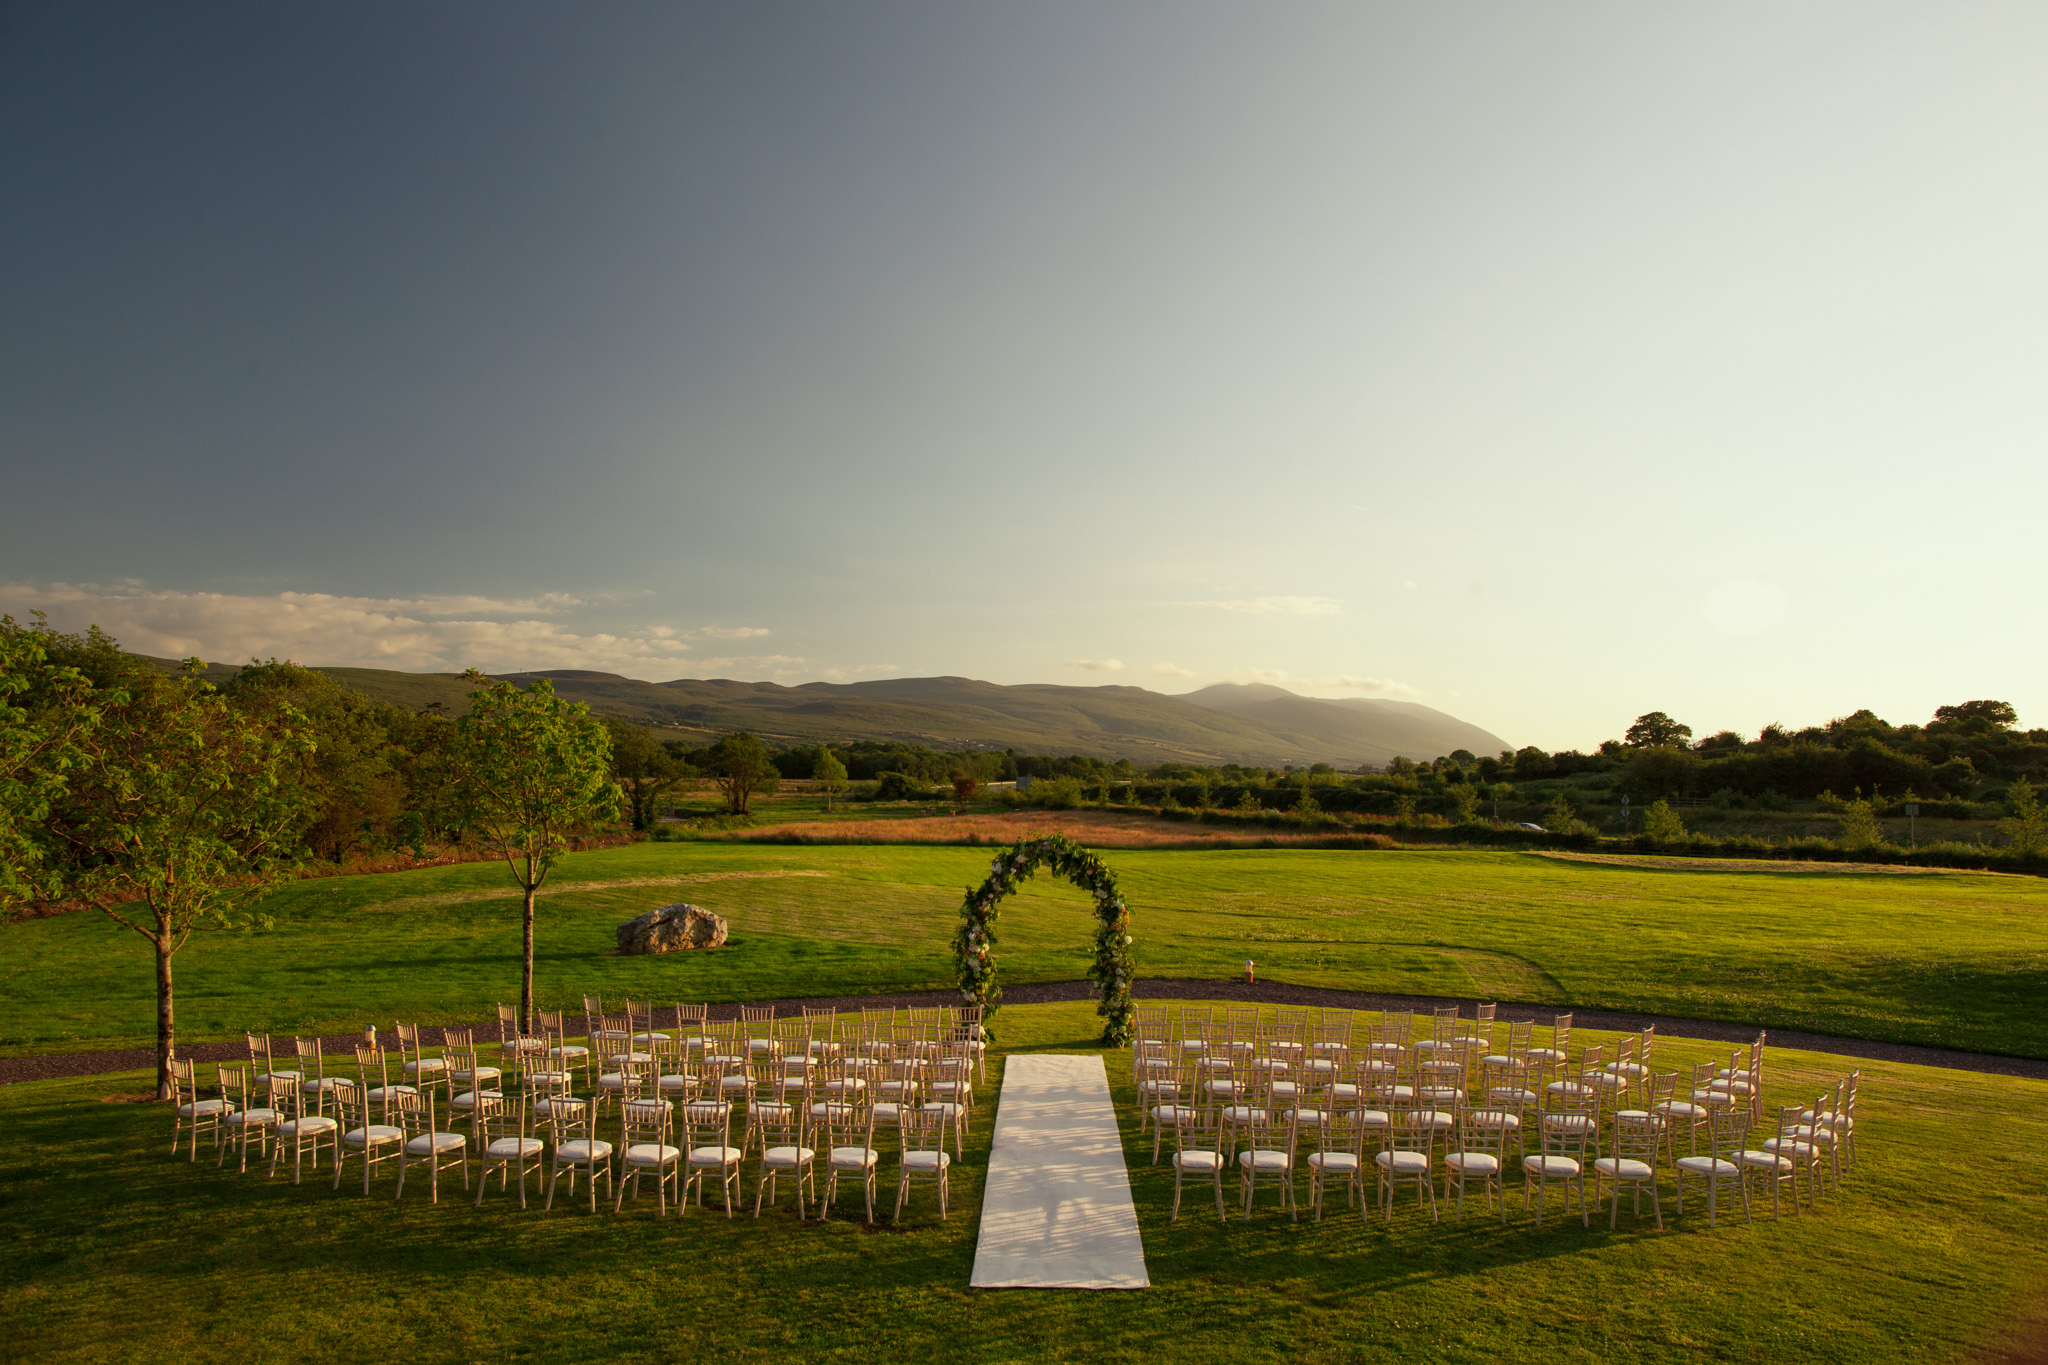 “The Lodge” at Ballygarry House, for the next generation Wedding destination